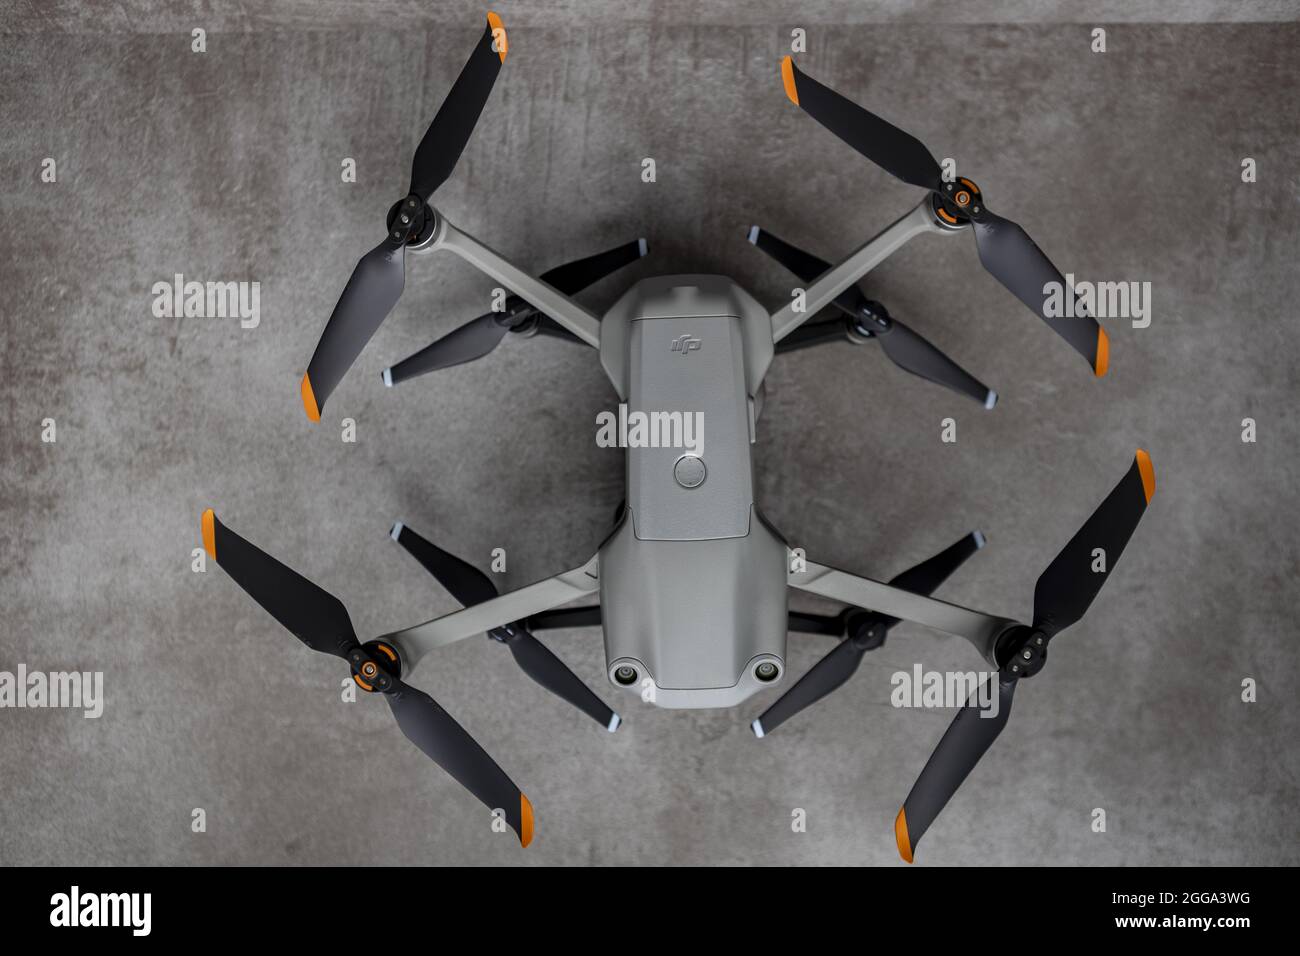 ZUTPHEN, NETHERLANDS - Aug 06, 2021: Large Air 2S quadcopter drone on top  of older version Mavic Air showing the evolutionary difference in size and  t Stock Photo - Alamy